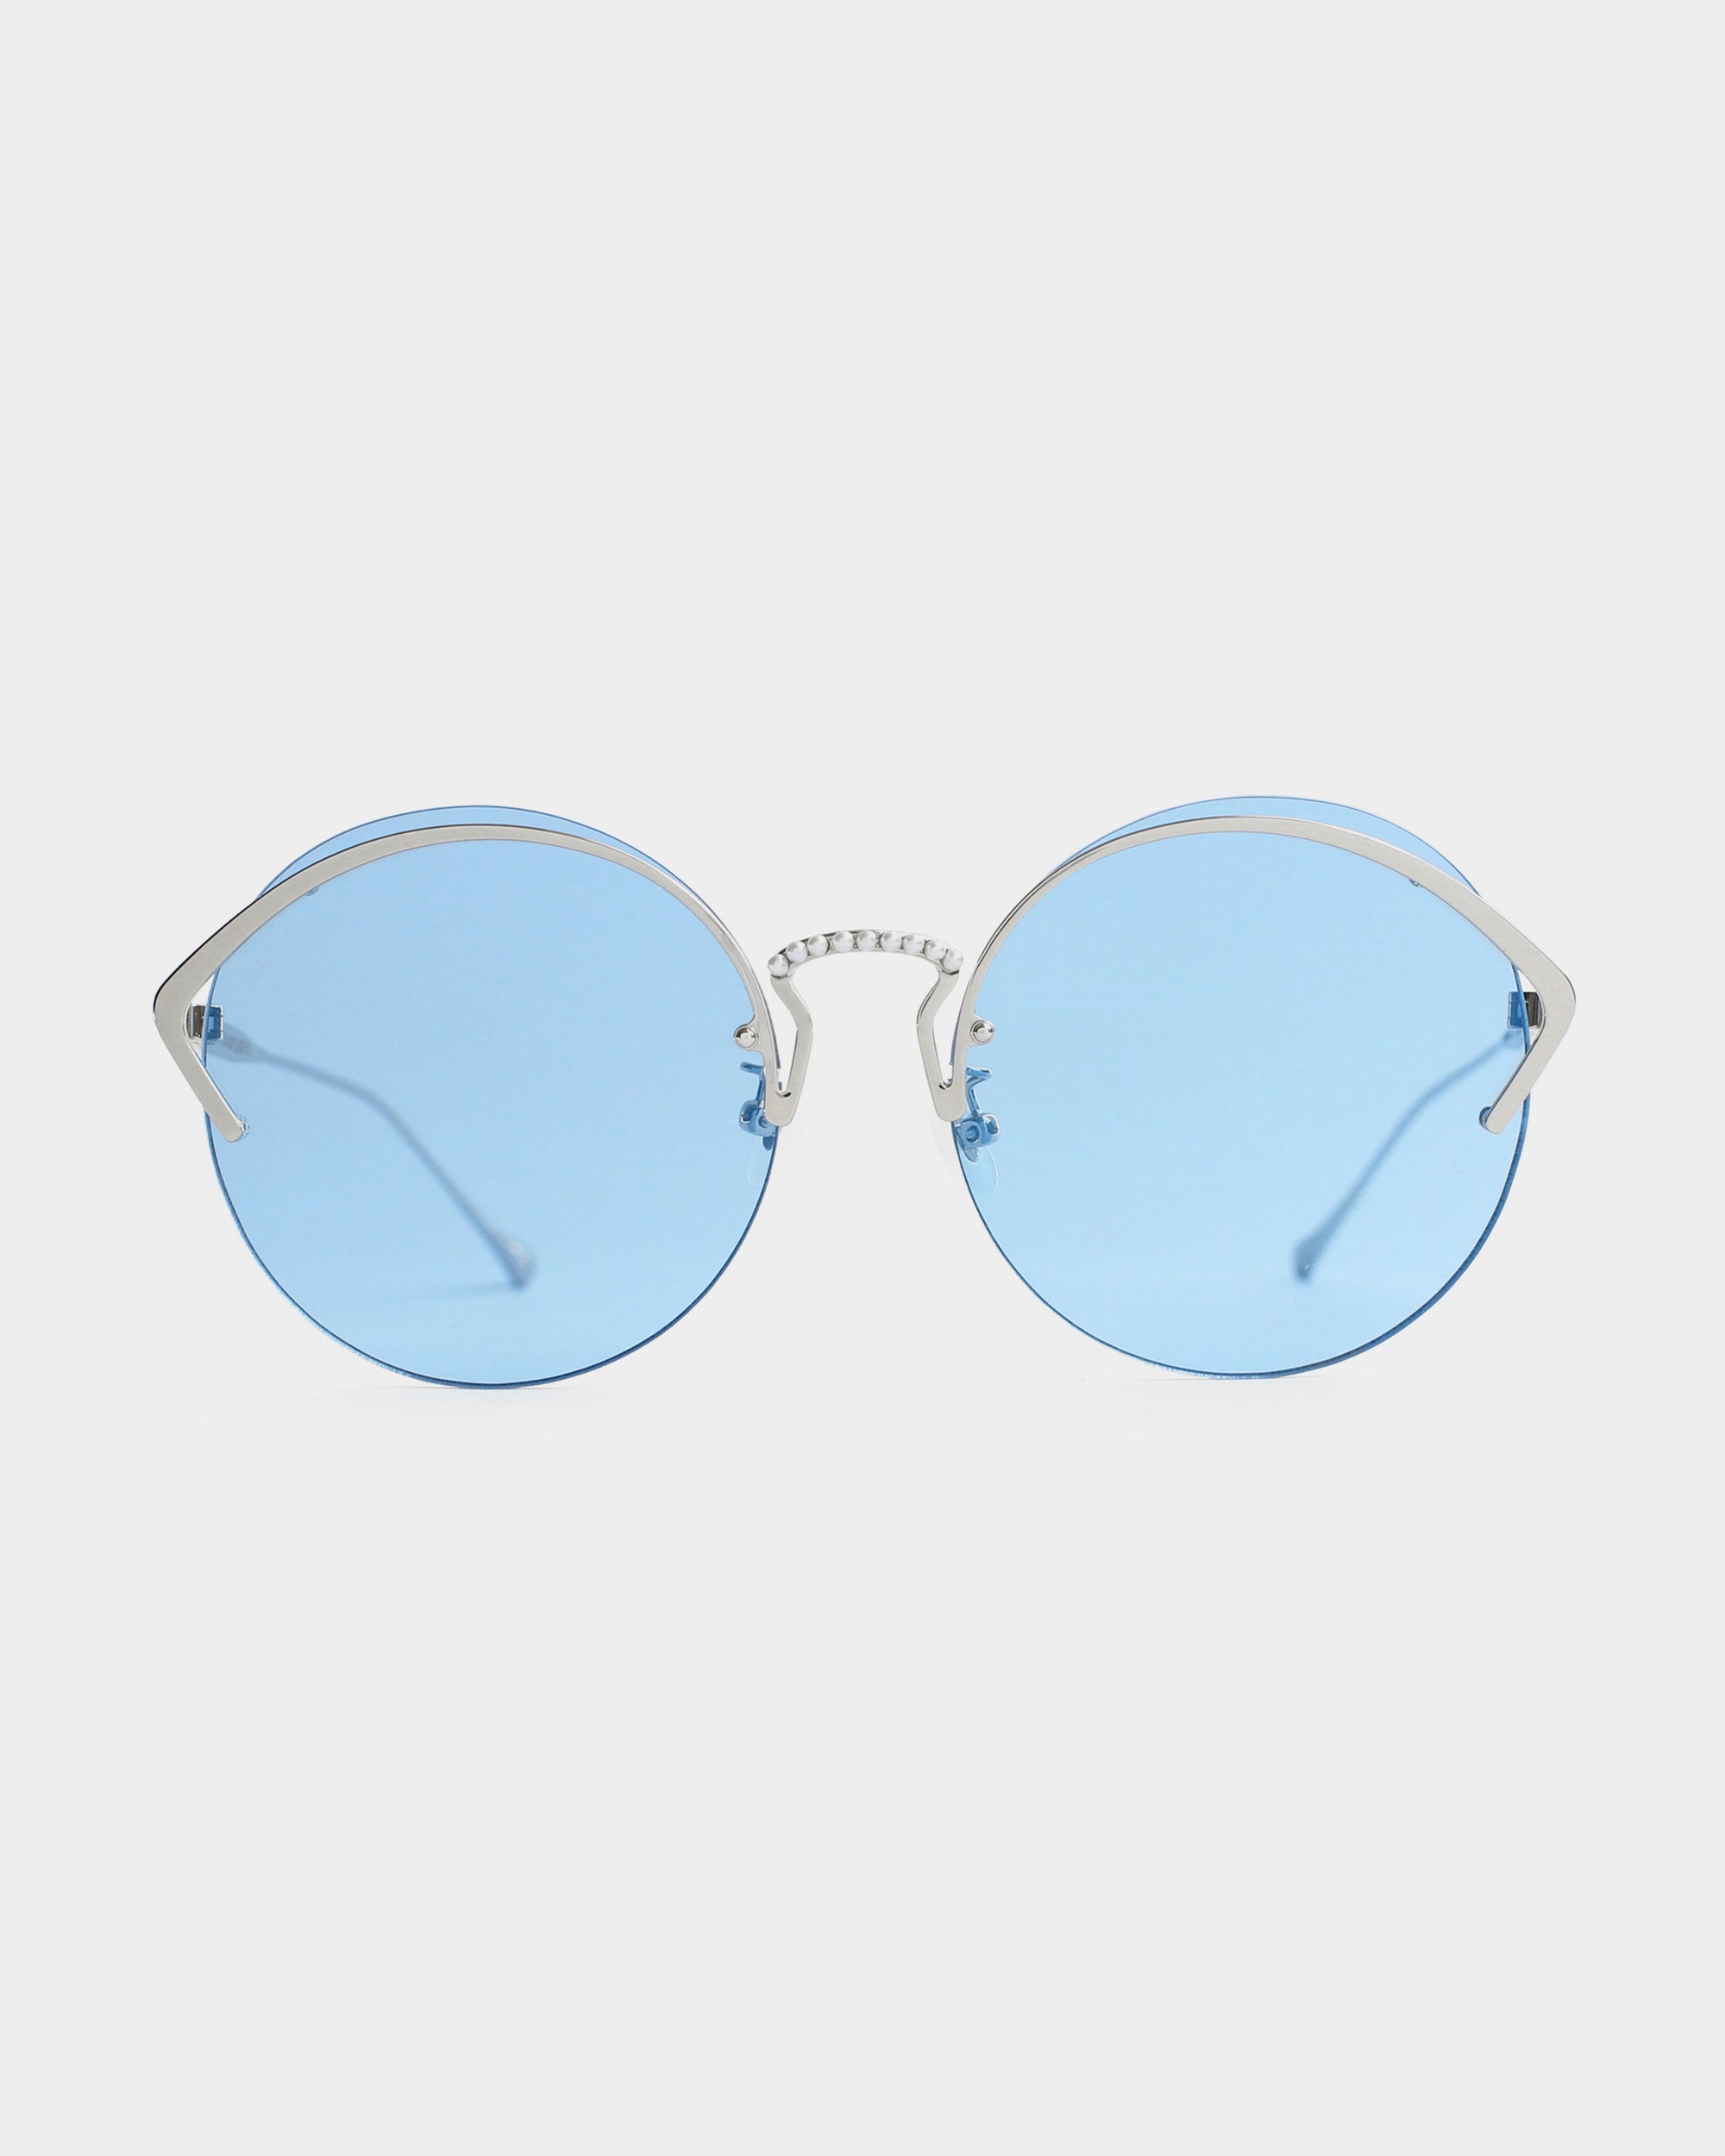 Round sunglasses with thin stainless steel frames and light blue Nylon lenses, set against a plain white background. The bridge features a subtle textured design, offering both style and UV protection. These are the Margarita sunglasses by For Art&#39;s Sake®.